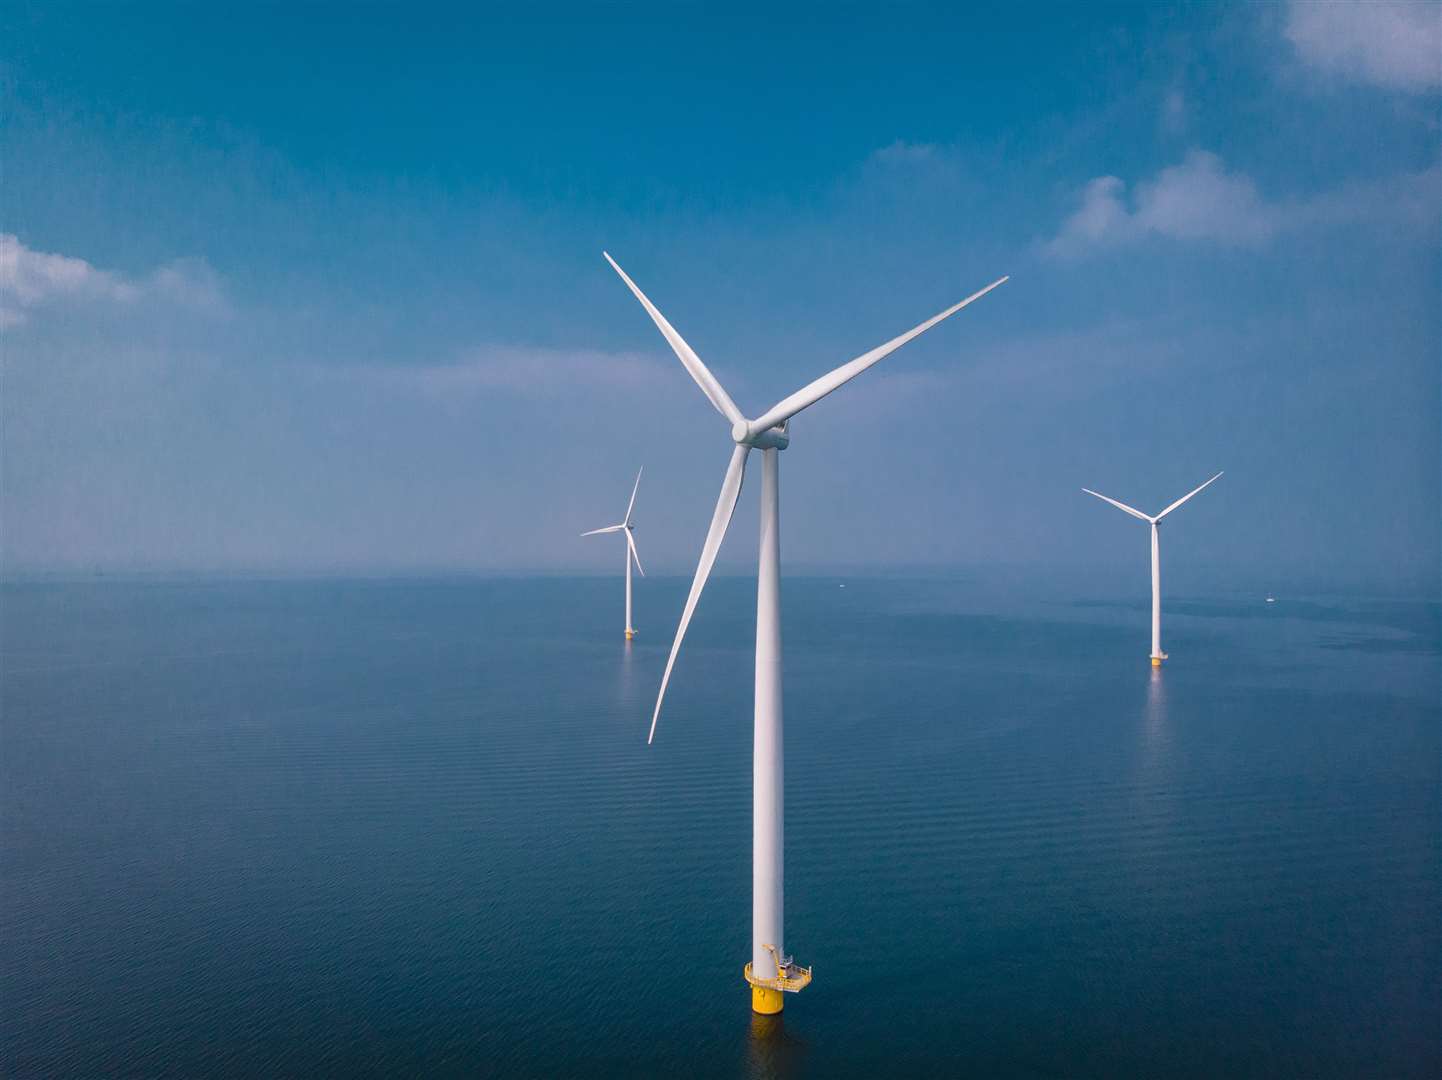 Approval of offshore wind farms 'is present throughout the population', according to the Scottish Government survey.